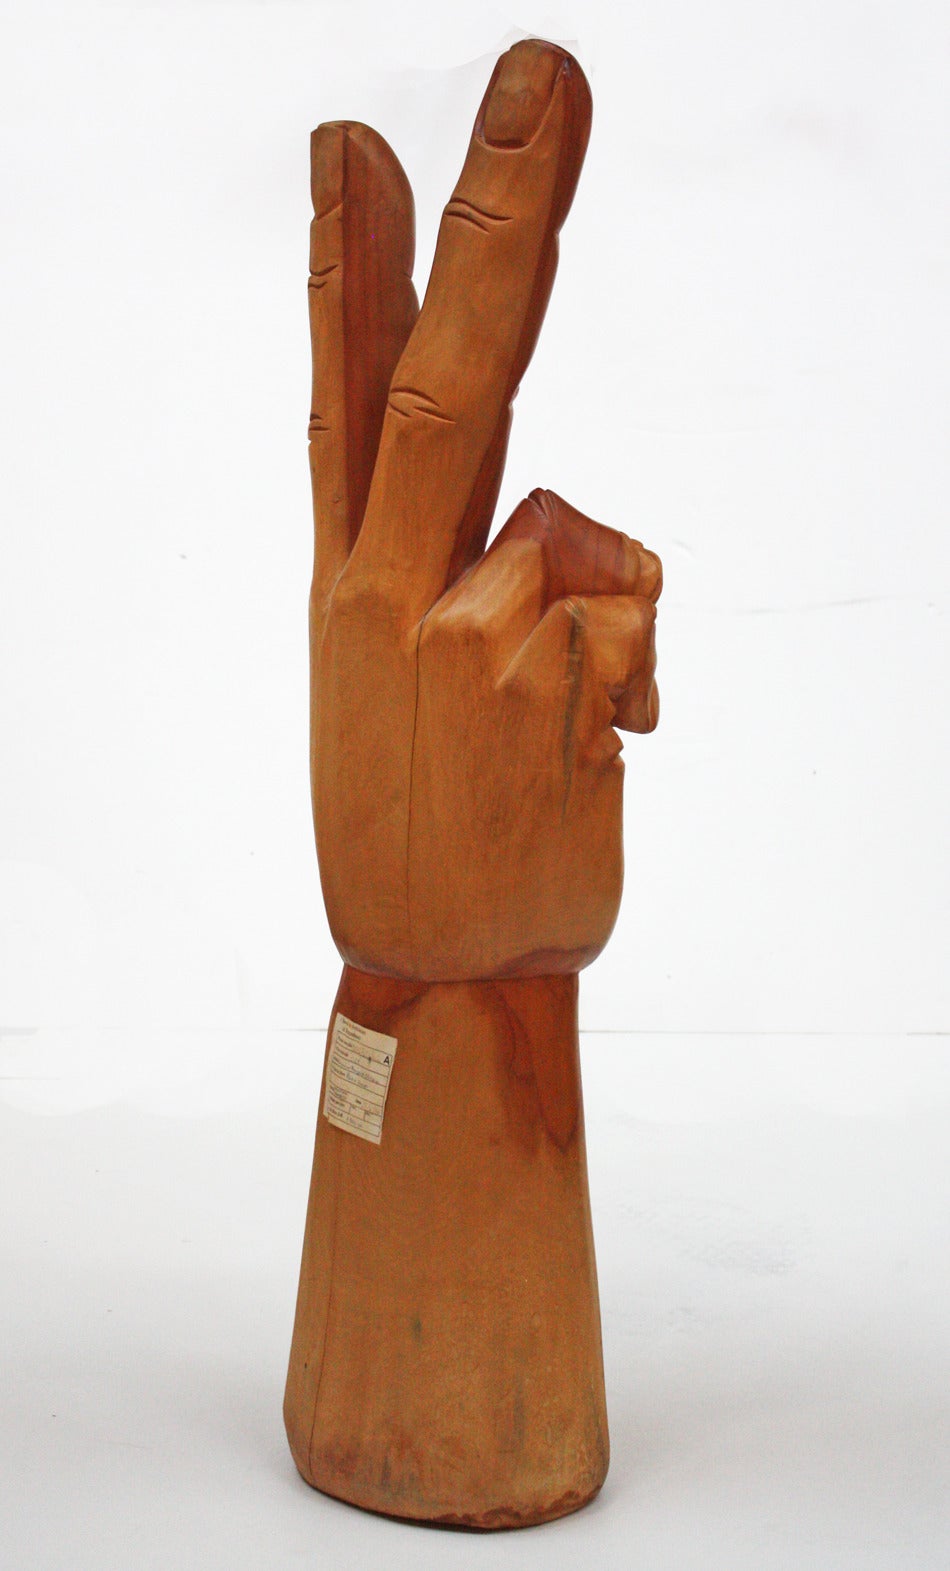 Paz e Amor / Peace and Love is a sculpture by Brazilian folk artist / sculptor Severino Borges de Oliveira also known as BITINHO, dated and signed bottom front 27/7/86 (see Image 5), paper label attached to the reverse (Image4) 

Paz e Amor (Image